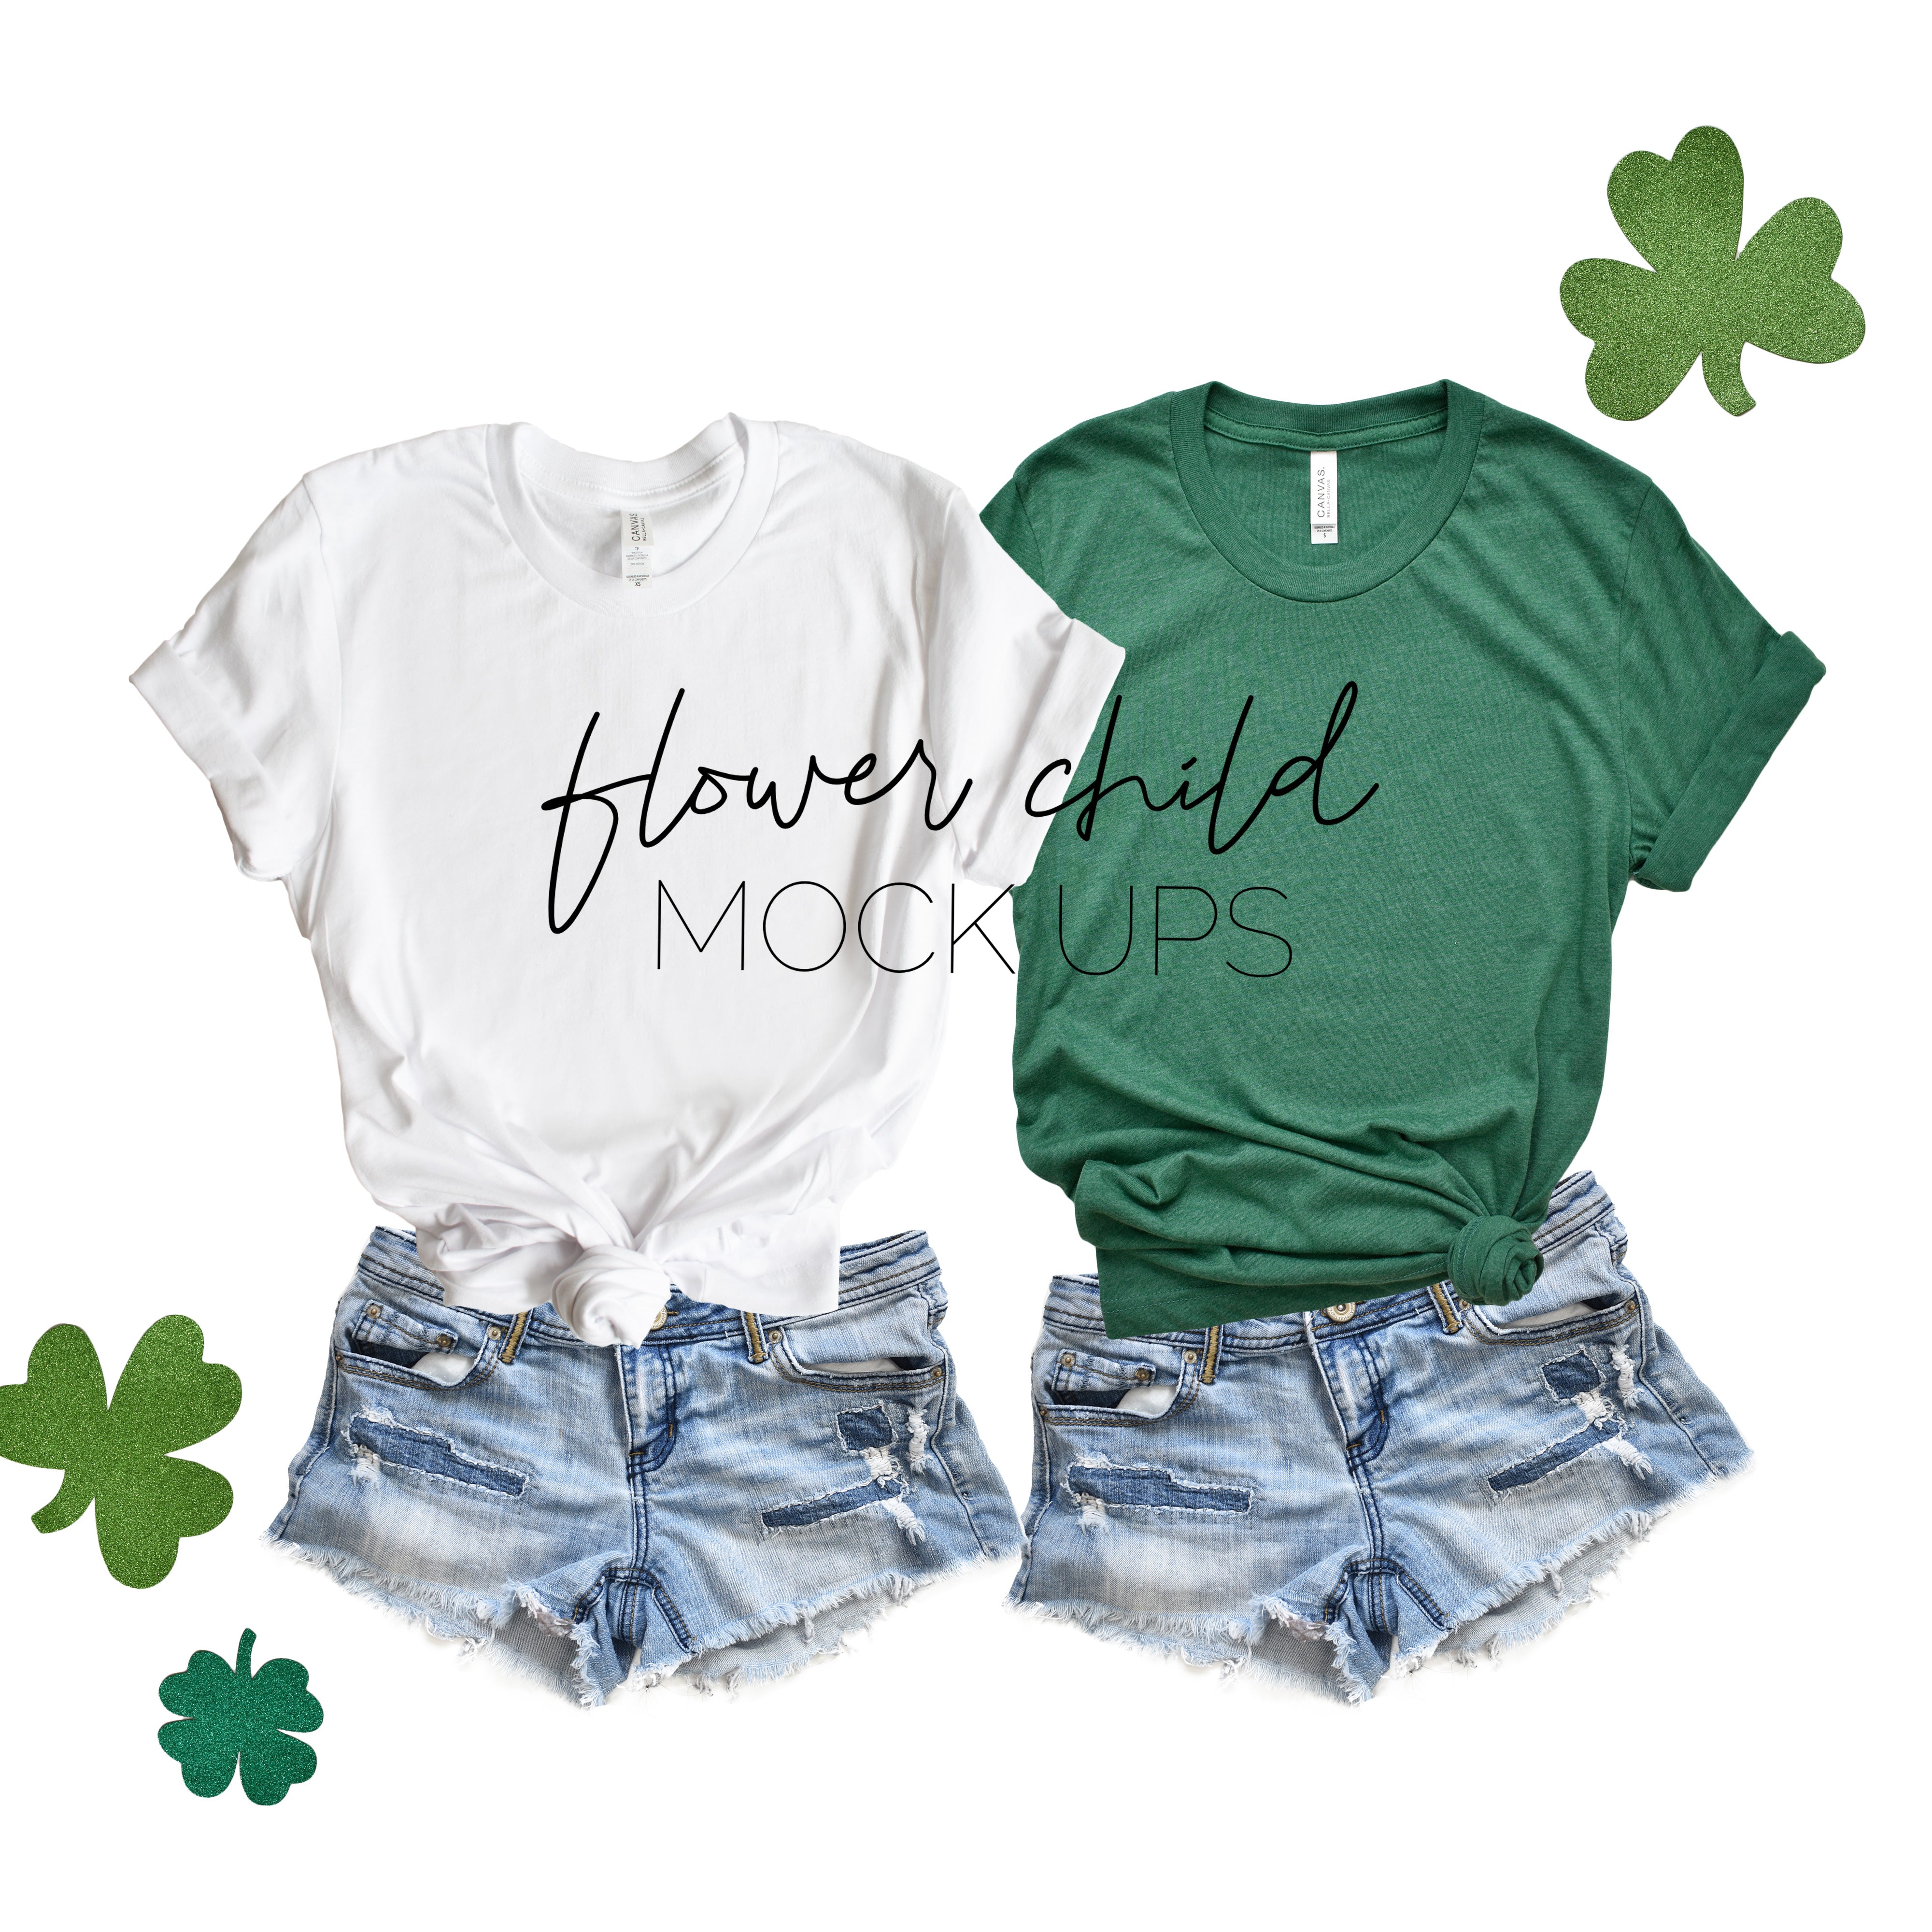 Bella Canvas 3001 Heather Grass Green White St Patrick S Day Mockup Flower Child Mock Ups Reviews On Judge Me